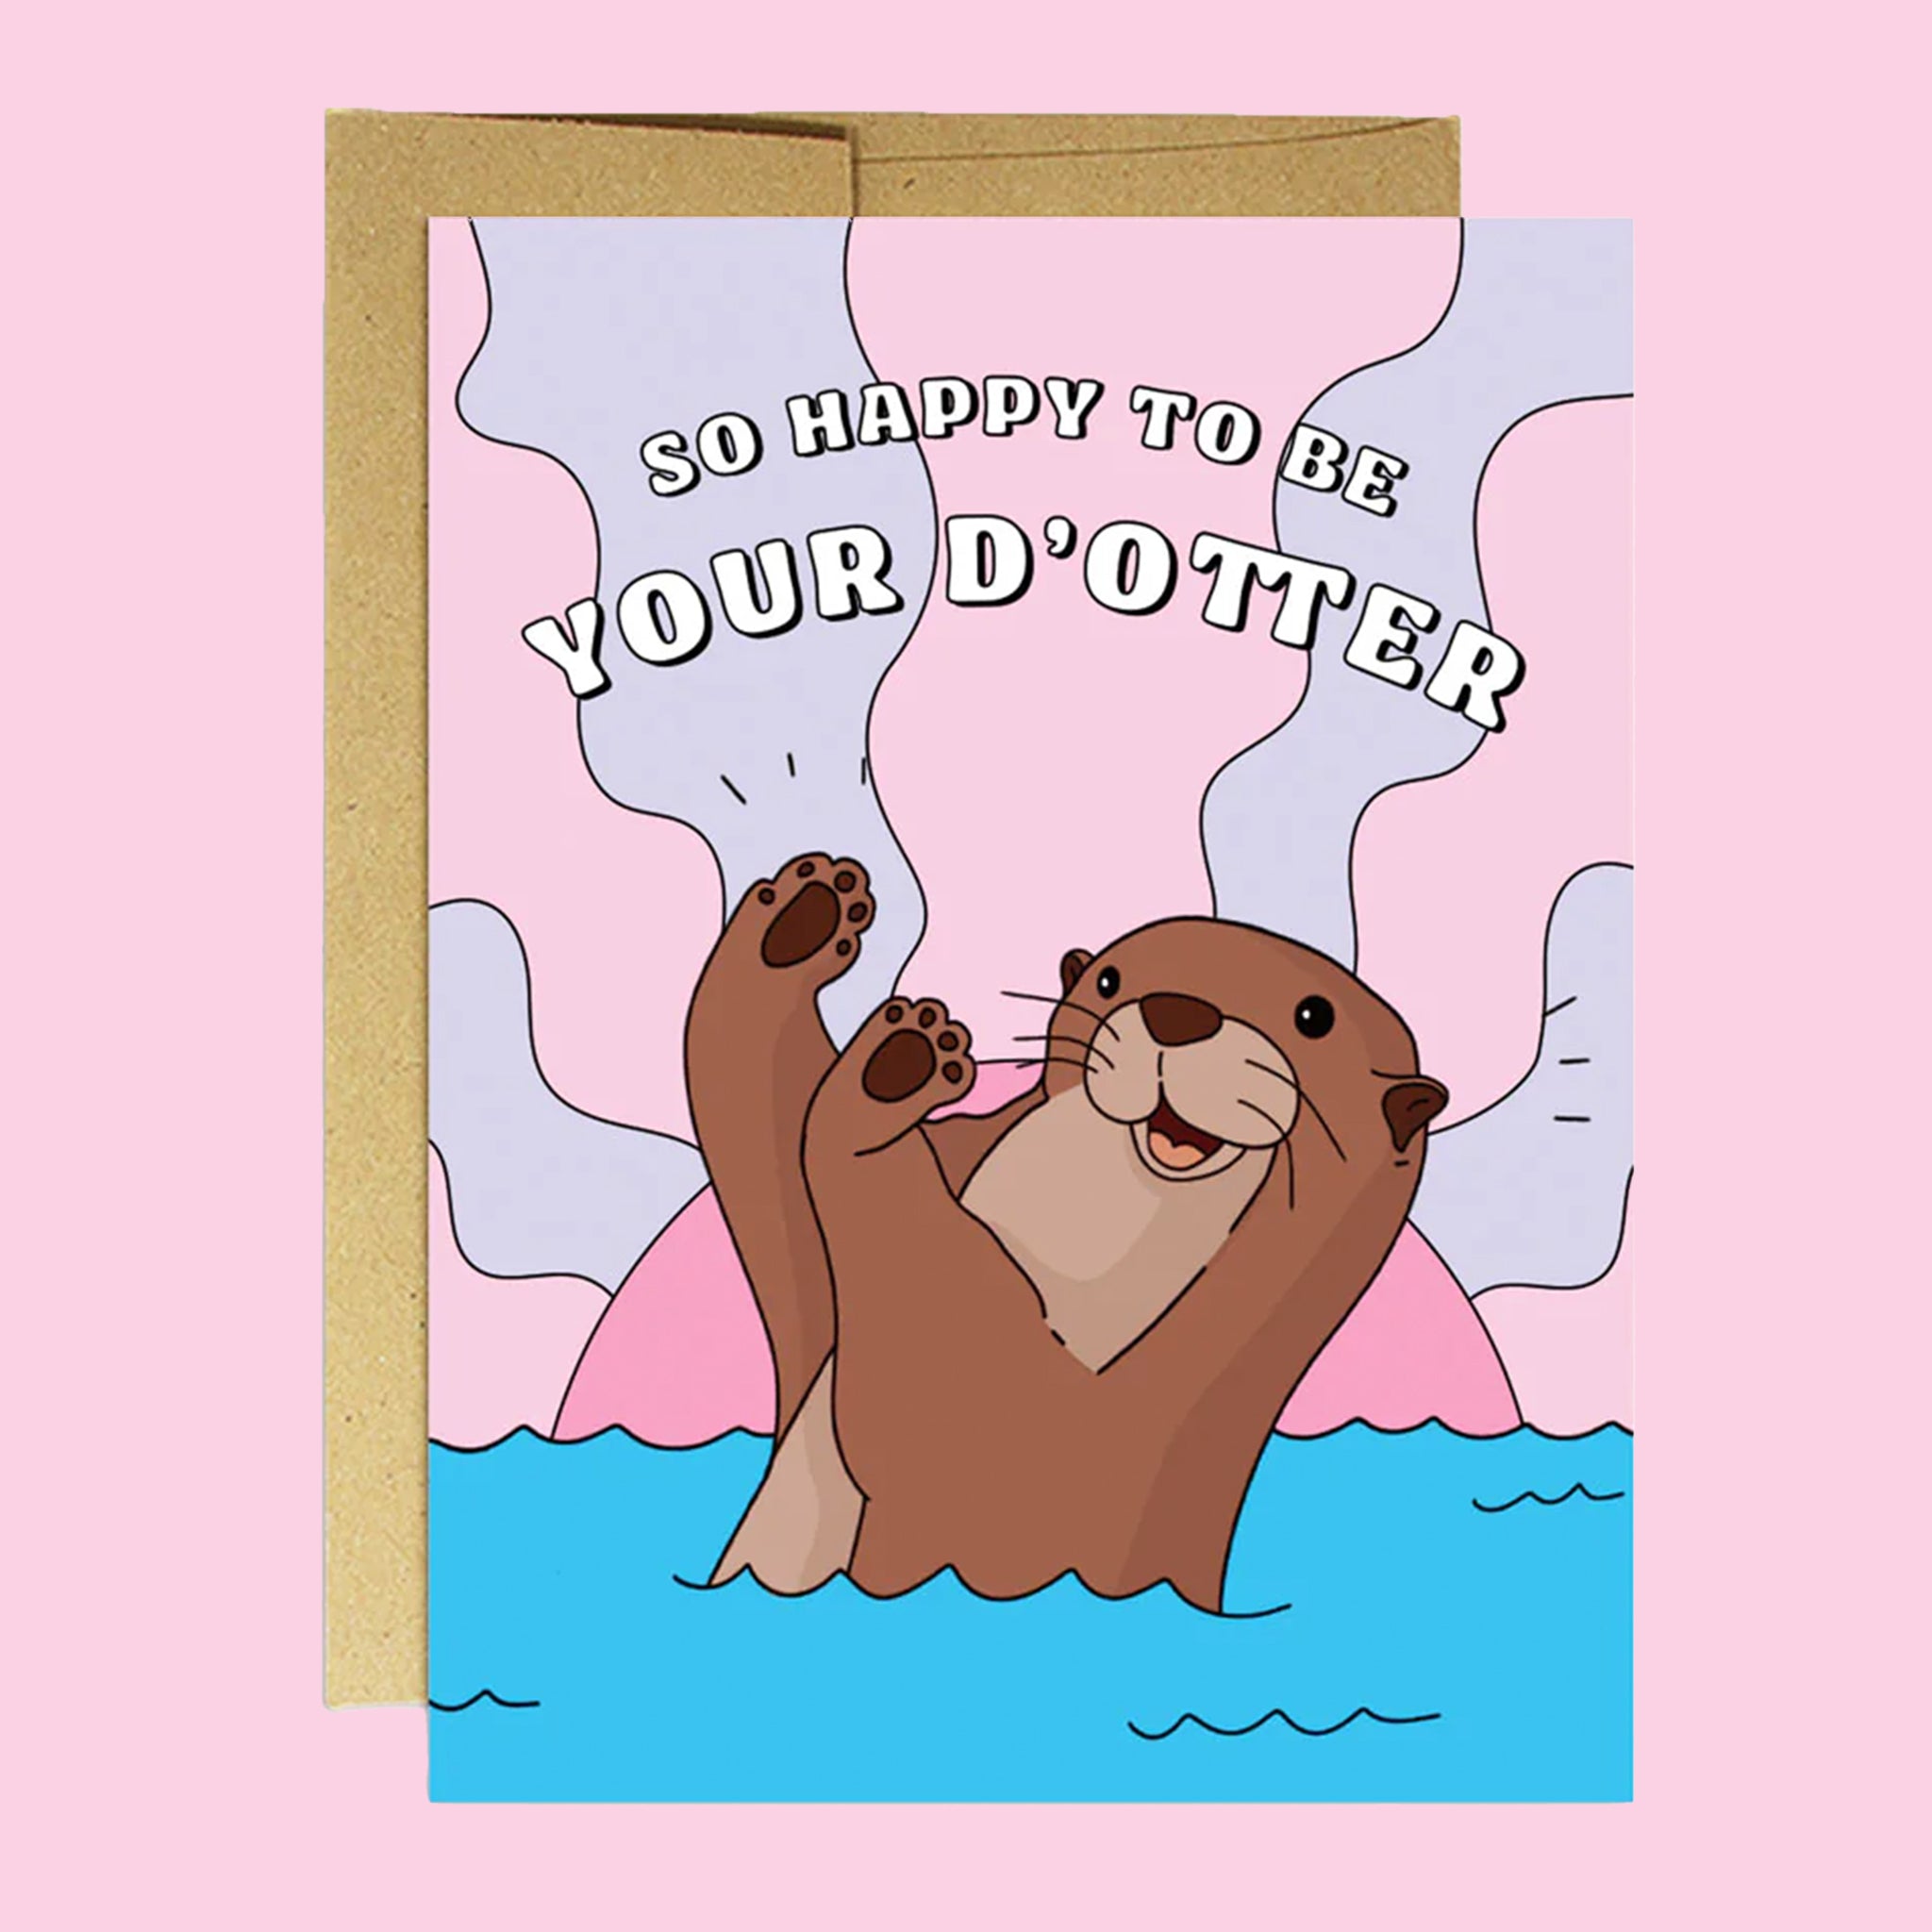 On a pink background is a pink and purple card with an illustration of an otter with text arched above that reads, "So Happy To Be Your D'Otter". 